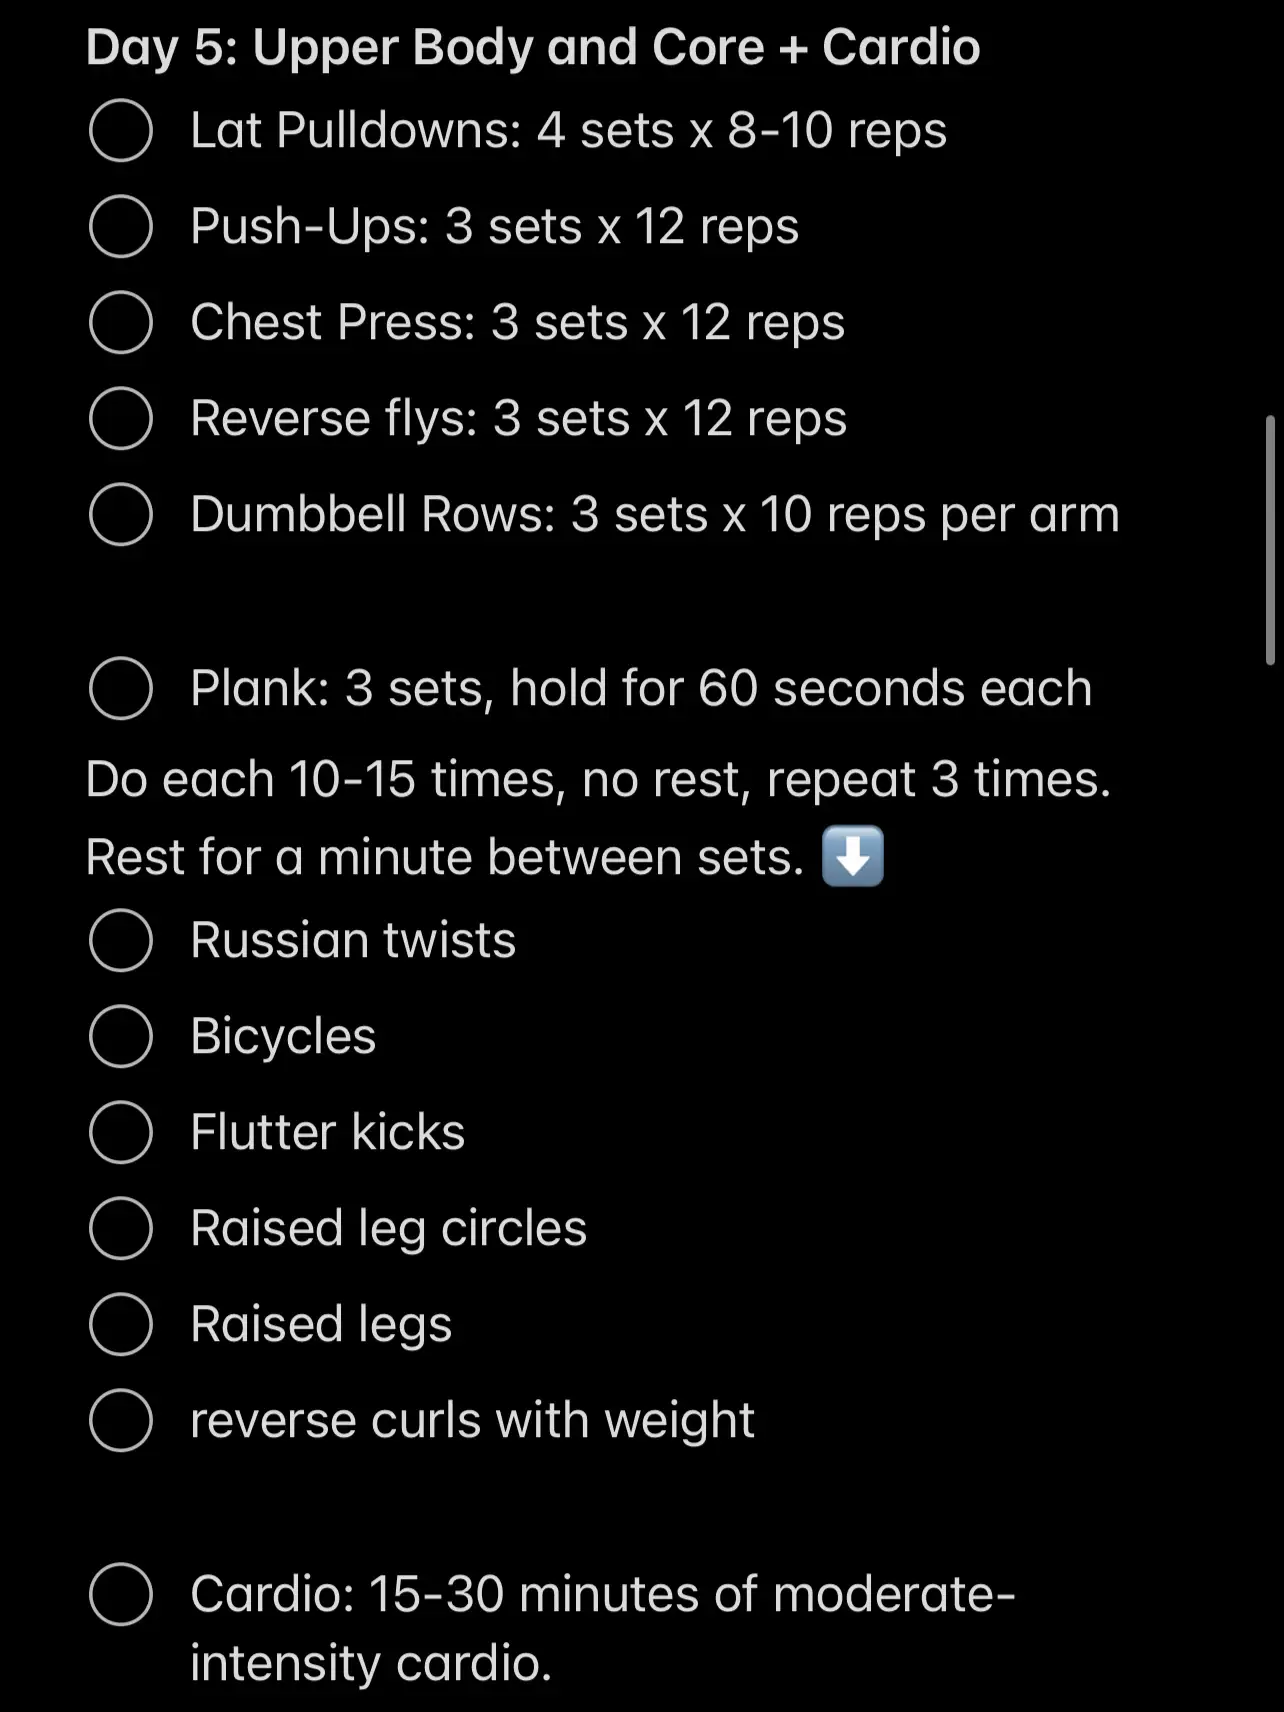 Caroline Girvan on X: Shoulders, biceps and triceps hit in this upper body  dumbbell and bodyweight shoulder and arm workout! Presses, raises, curls &  push ups all combined to build strength in